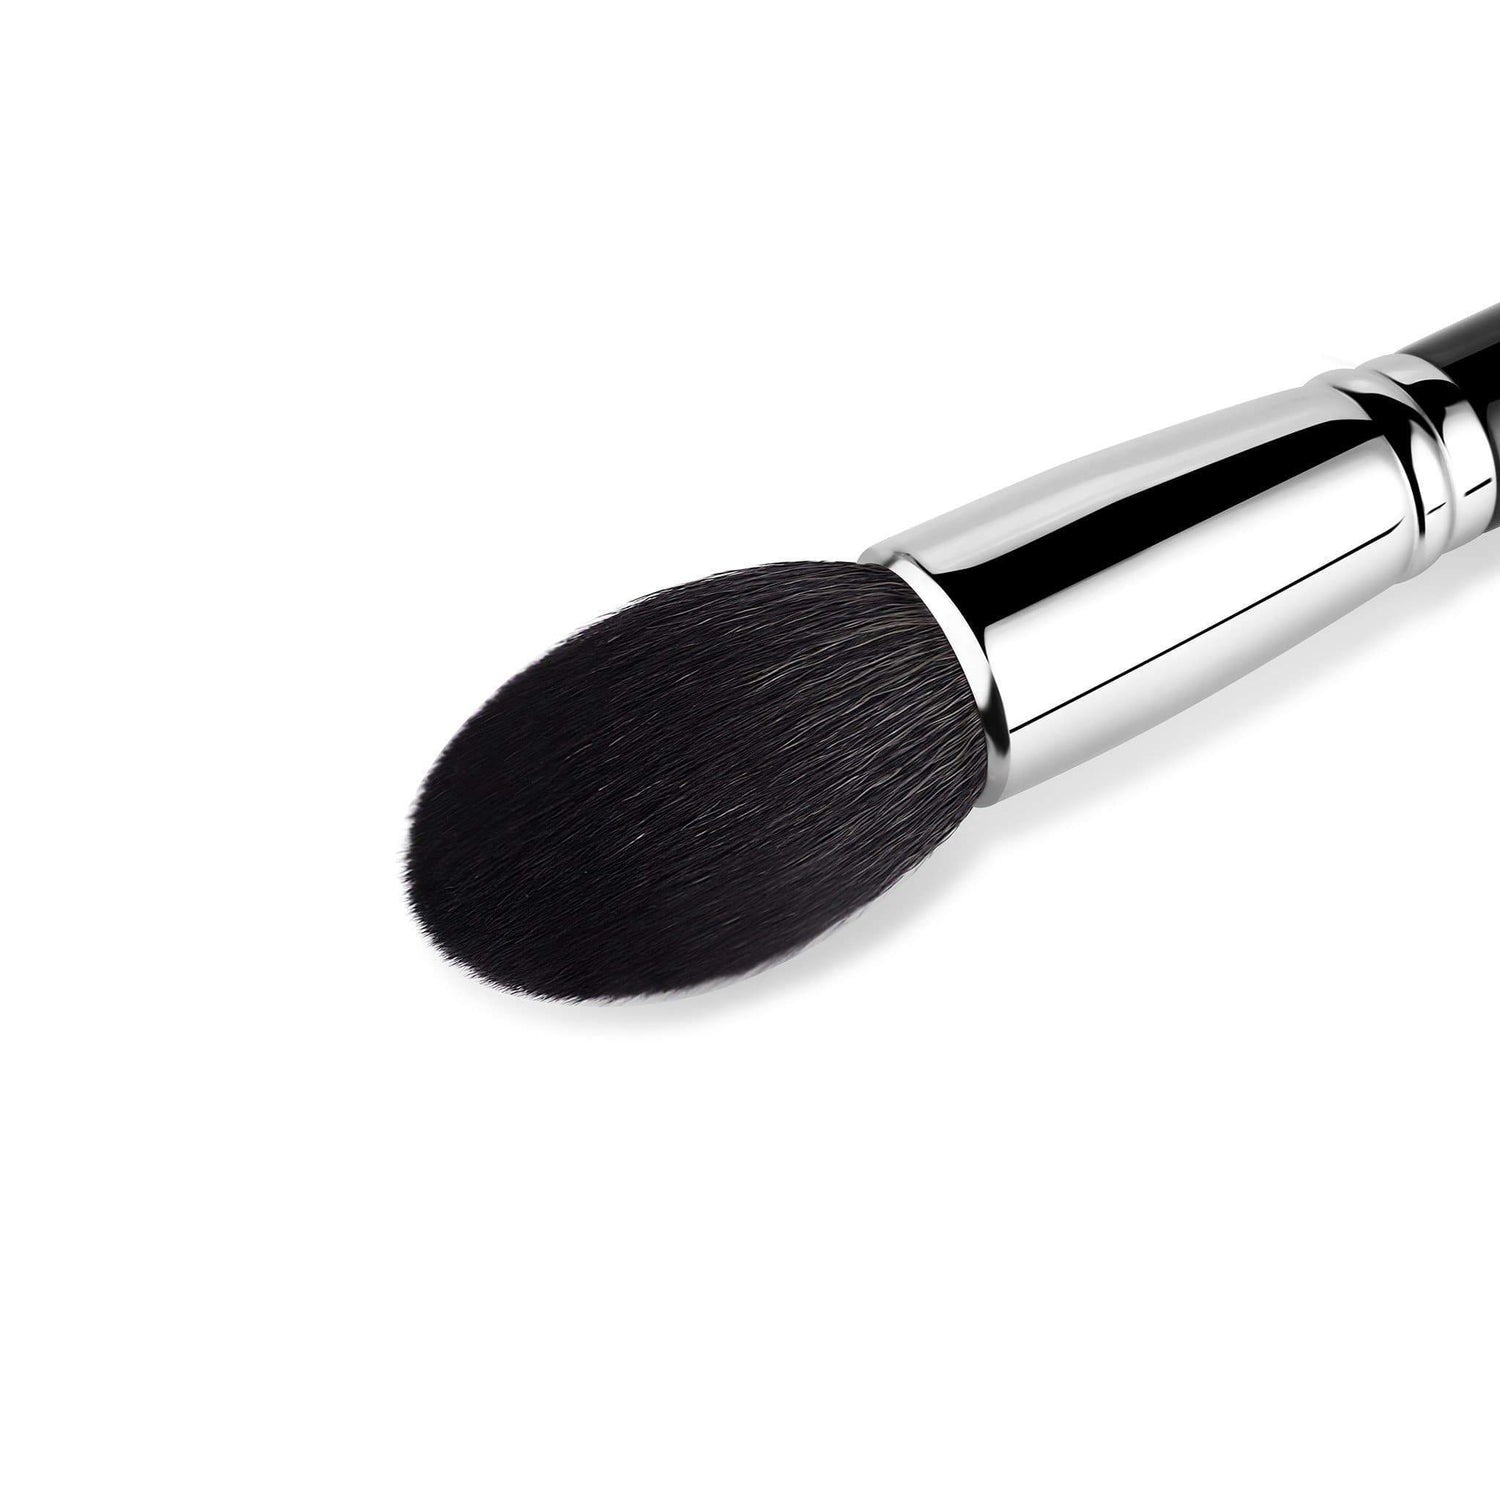 F607 - TAPERED FACE BRUSH - EIGSHOW Beauty